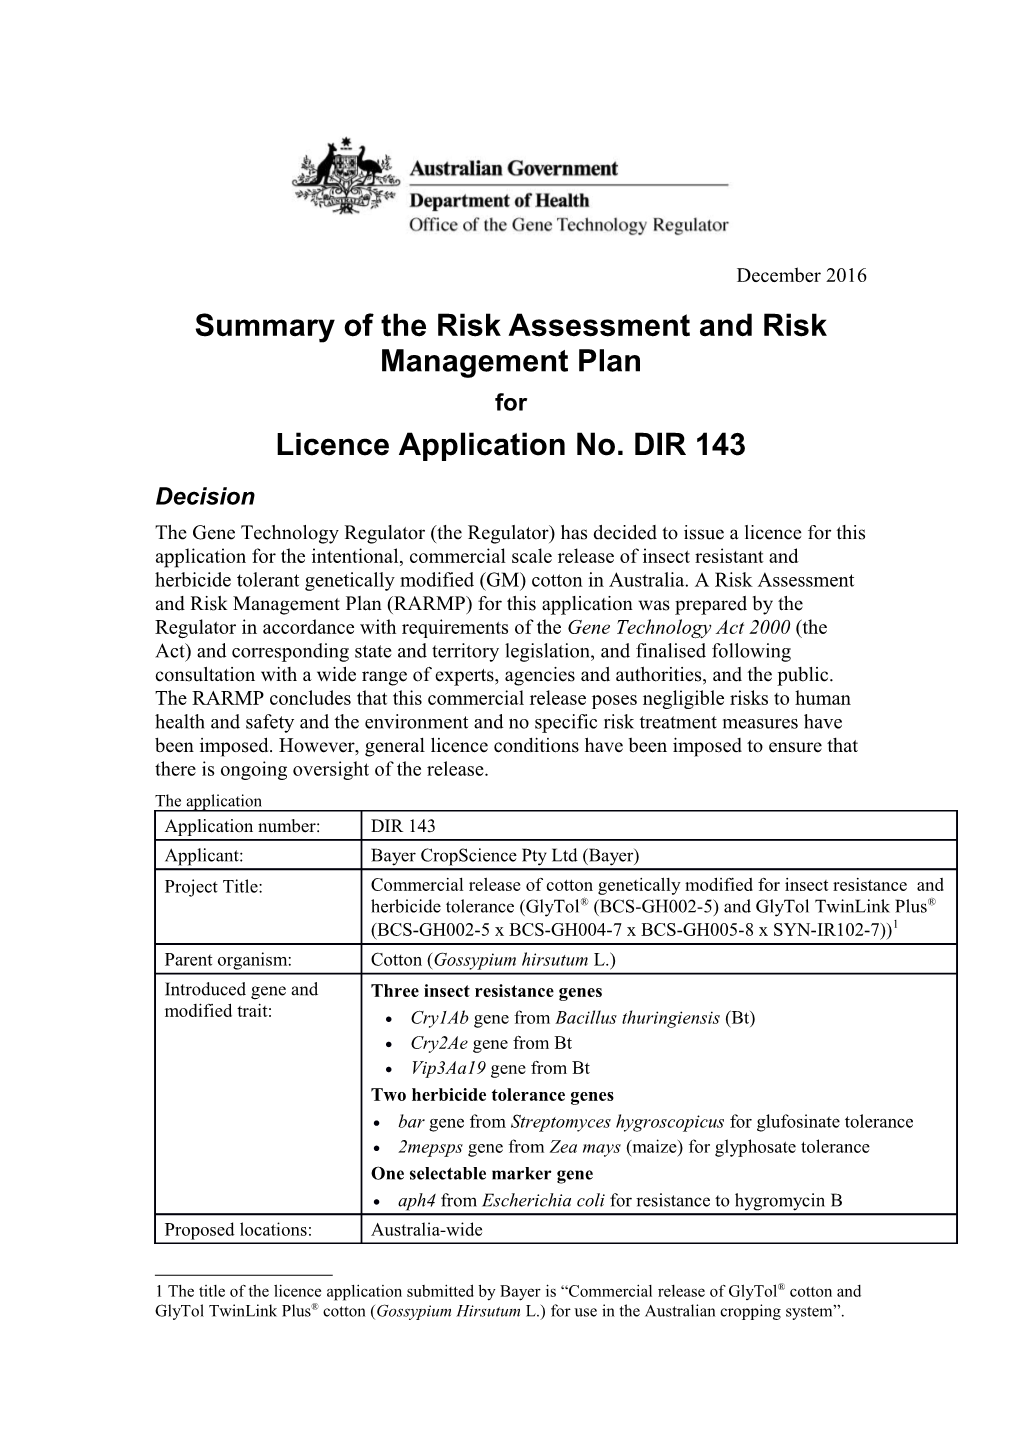 DIR 143 - Summary of Risk Assessment and Risk Management Plan